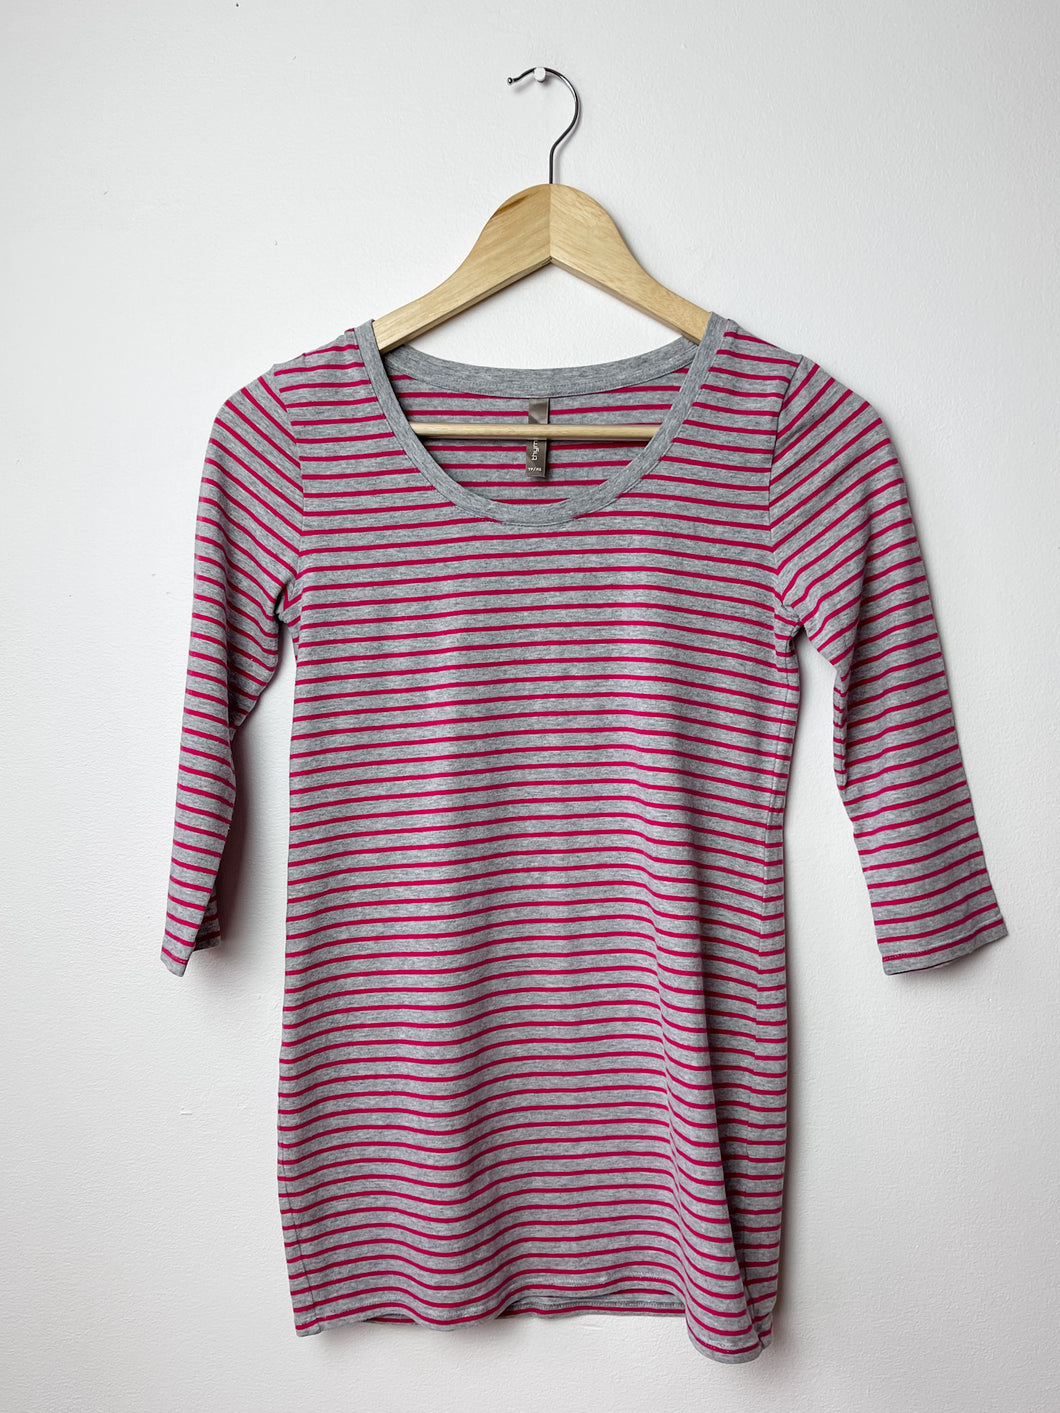 Striped Thyme Maternity Shirt Size Extra Small